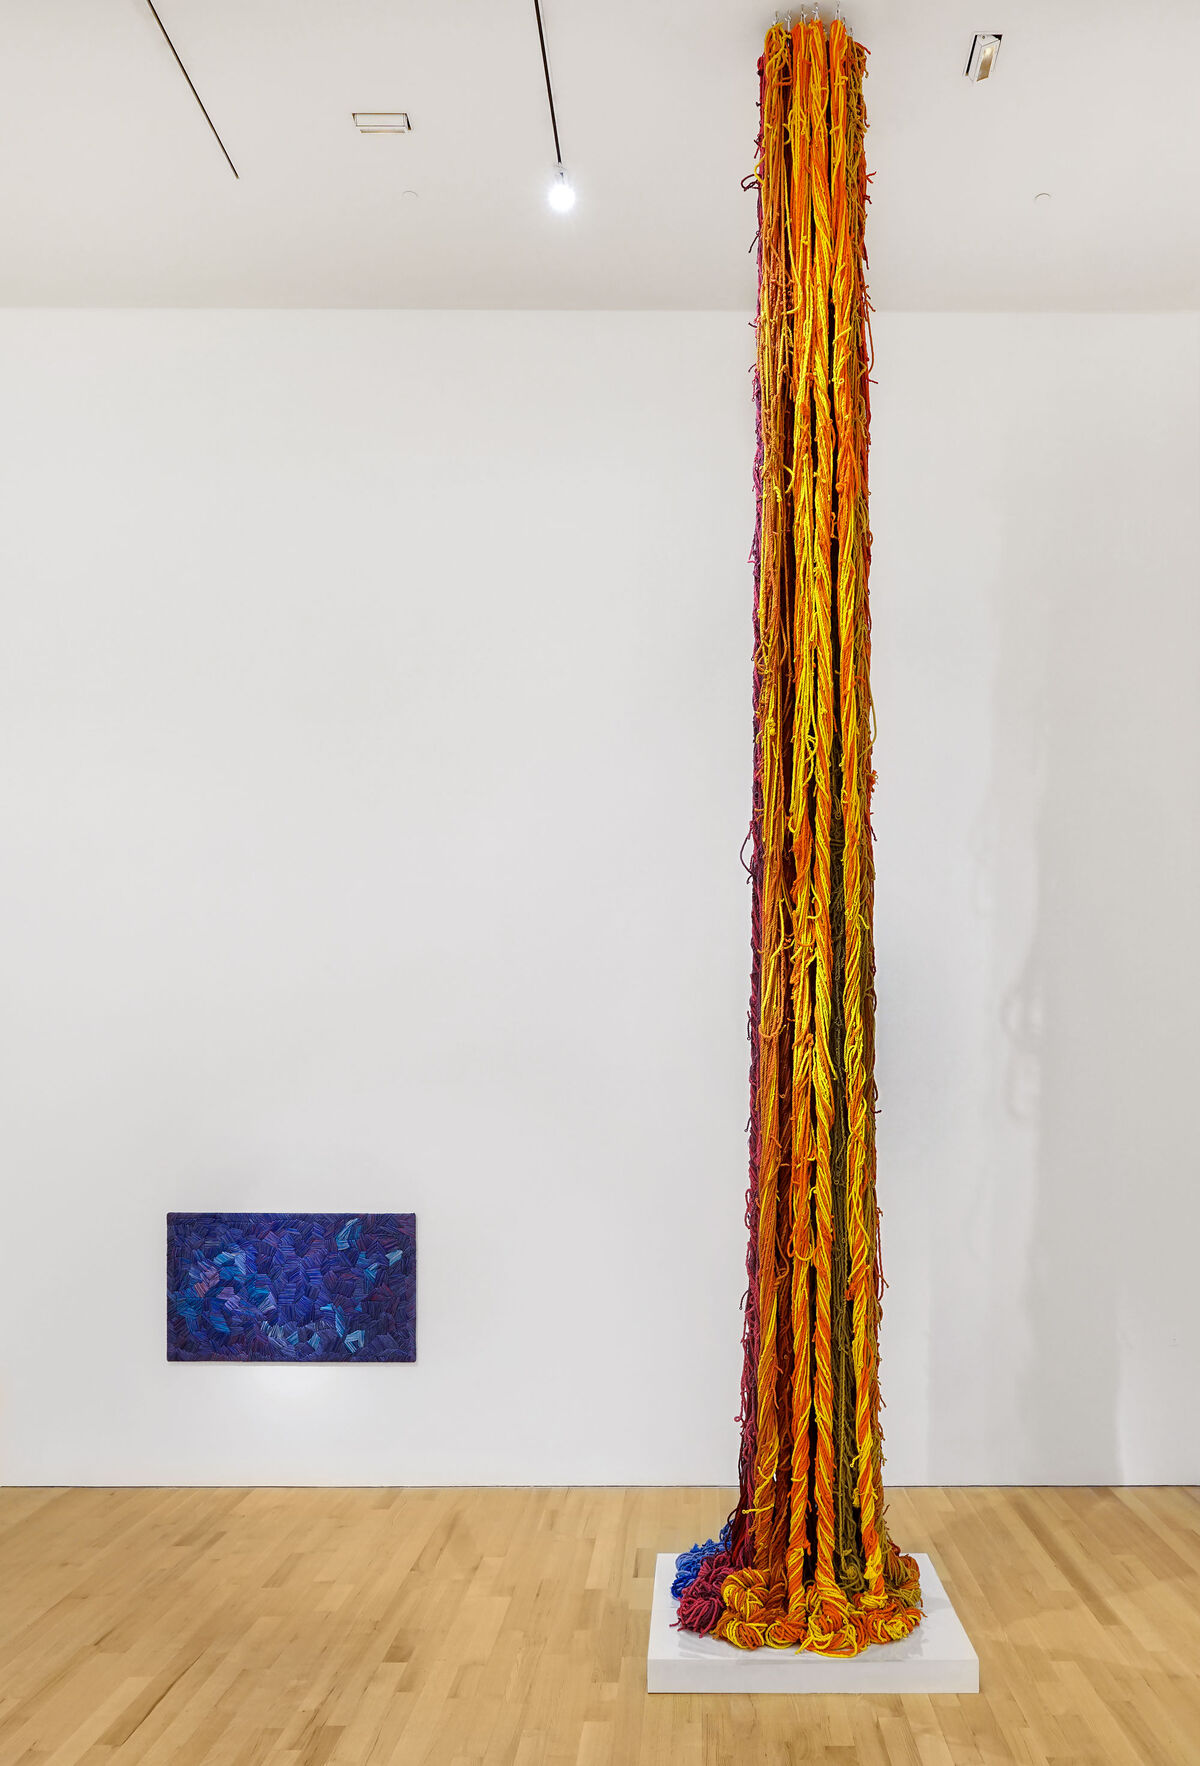 Installation view of Sheila Hicks, Blue Gros Point, ca. 1990, and Questioning Column, 2016, at The Bass, 2019. Photo by Zachary Balber. Courtesy of The Bass, Miami Beach.